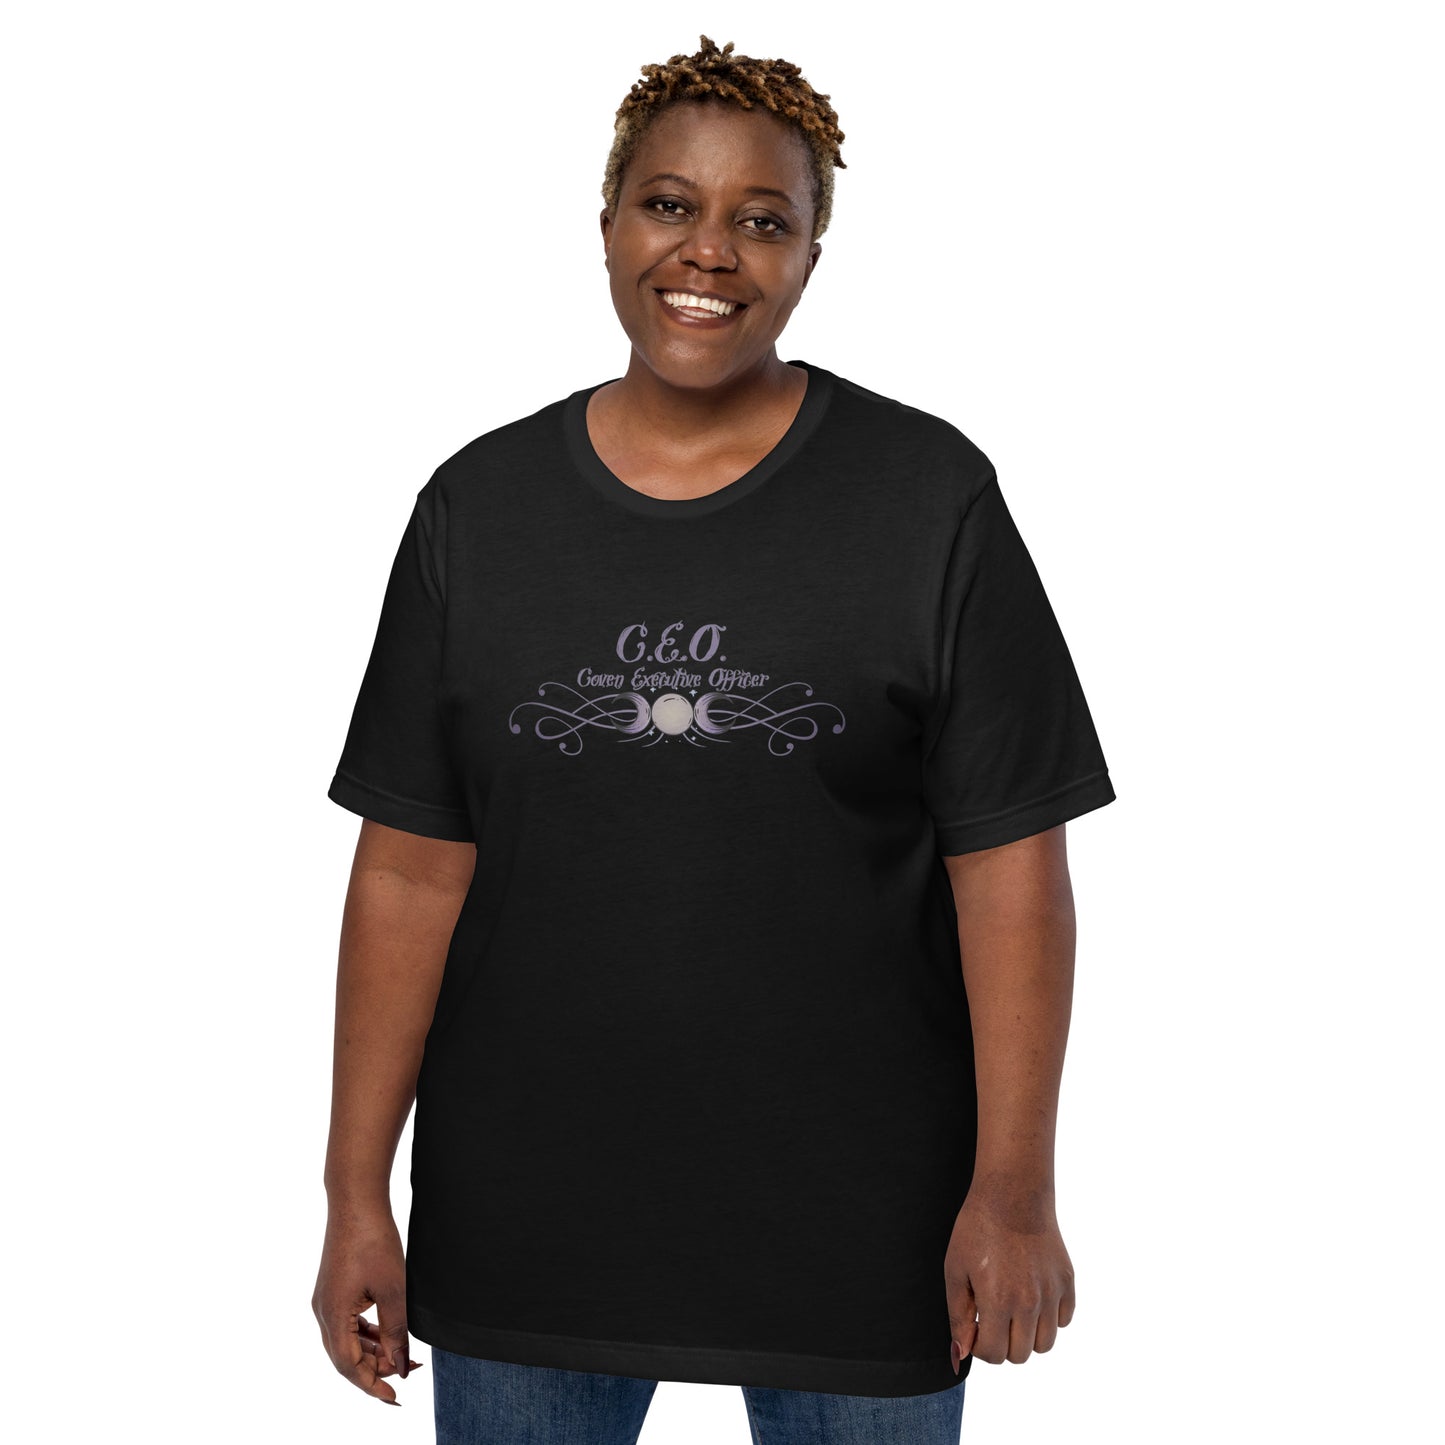 Coven Executive Officer Unisex Shirt